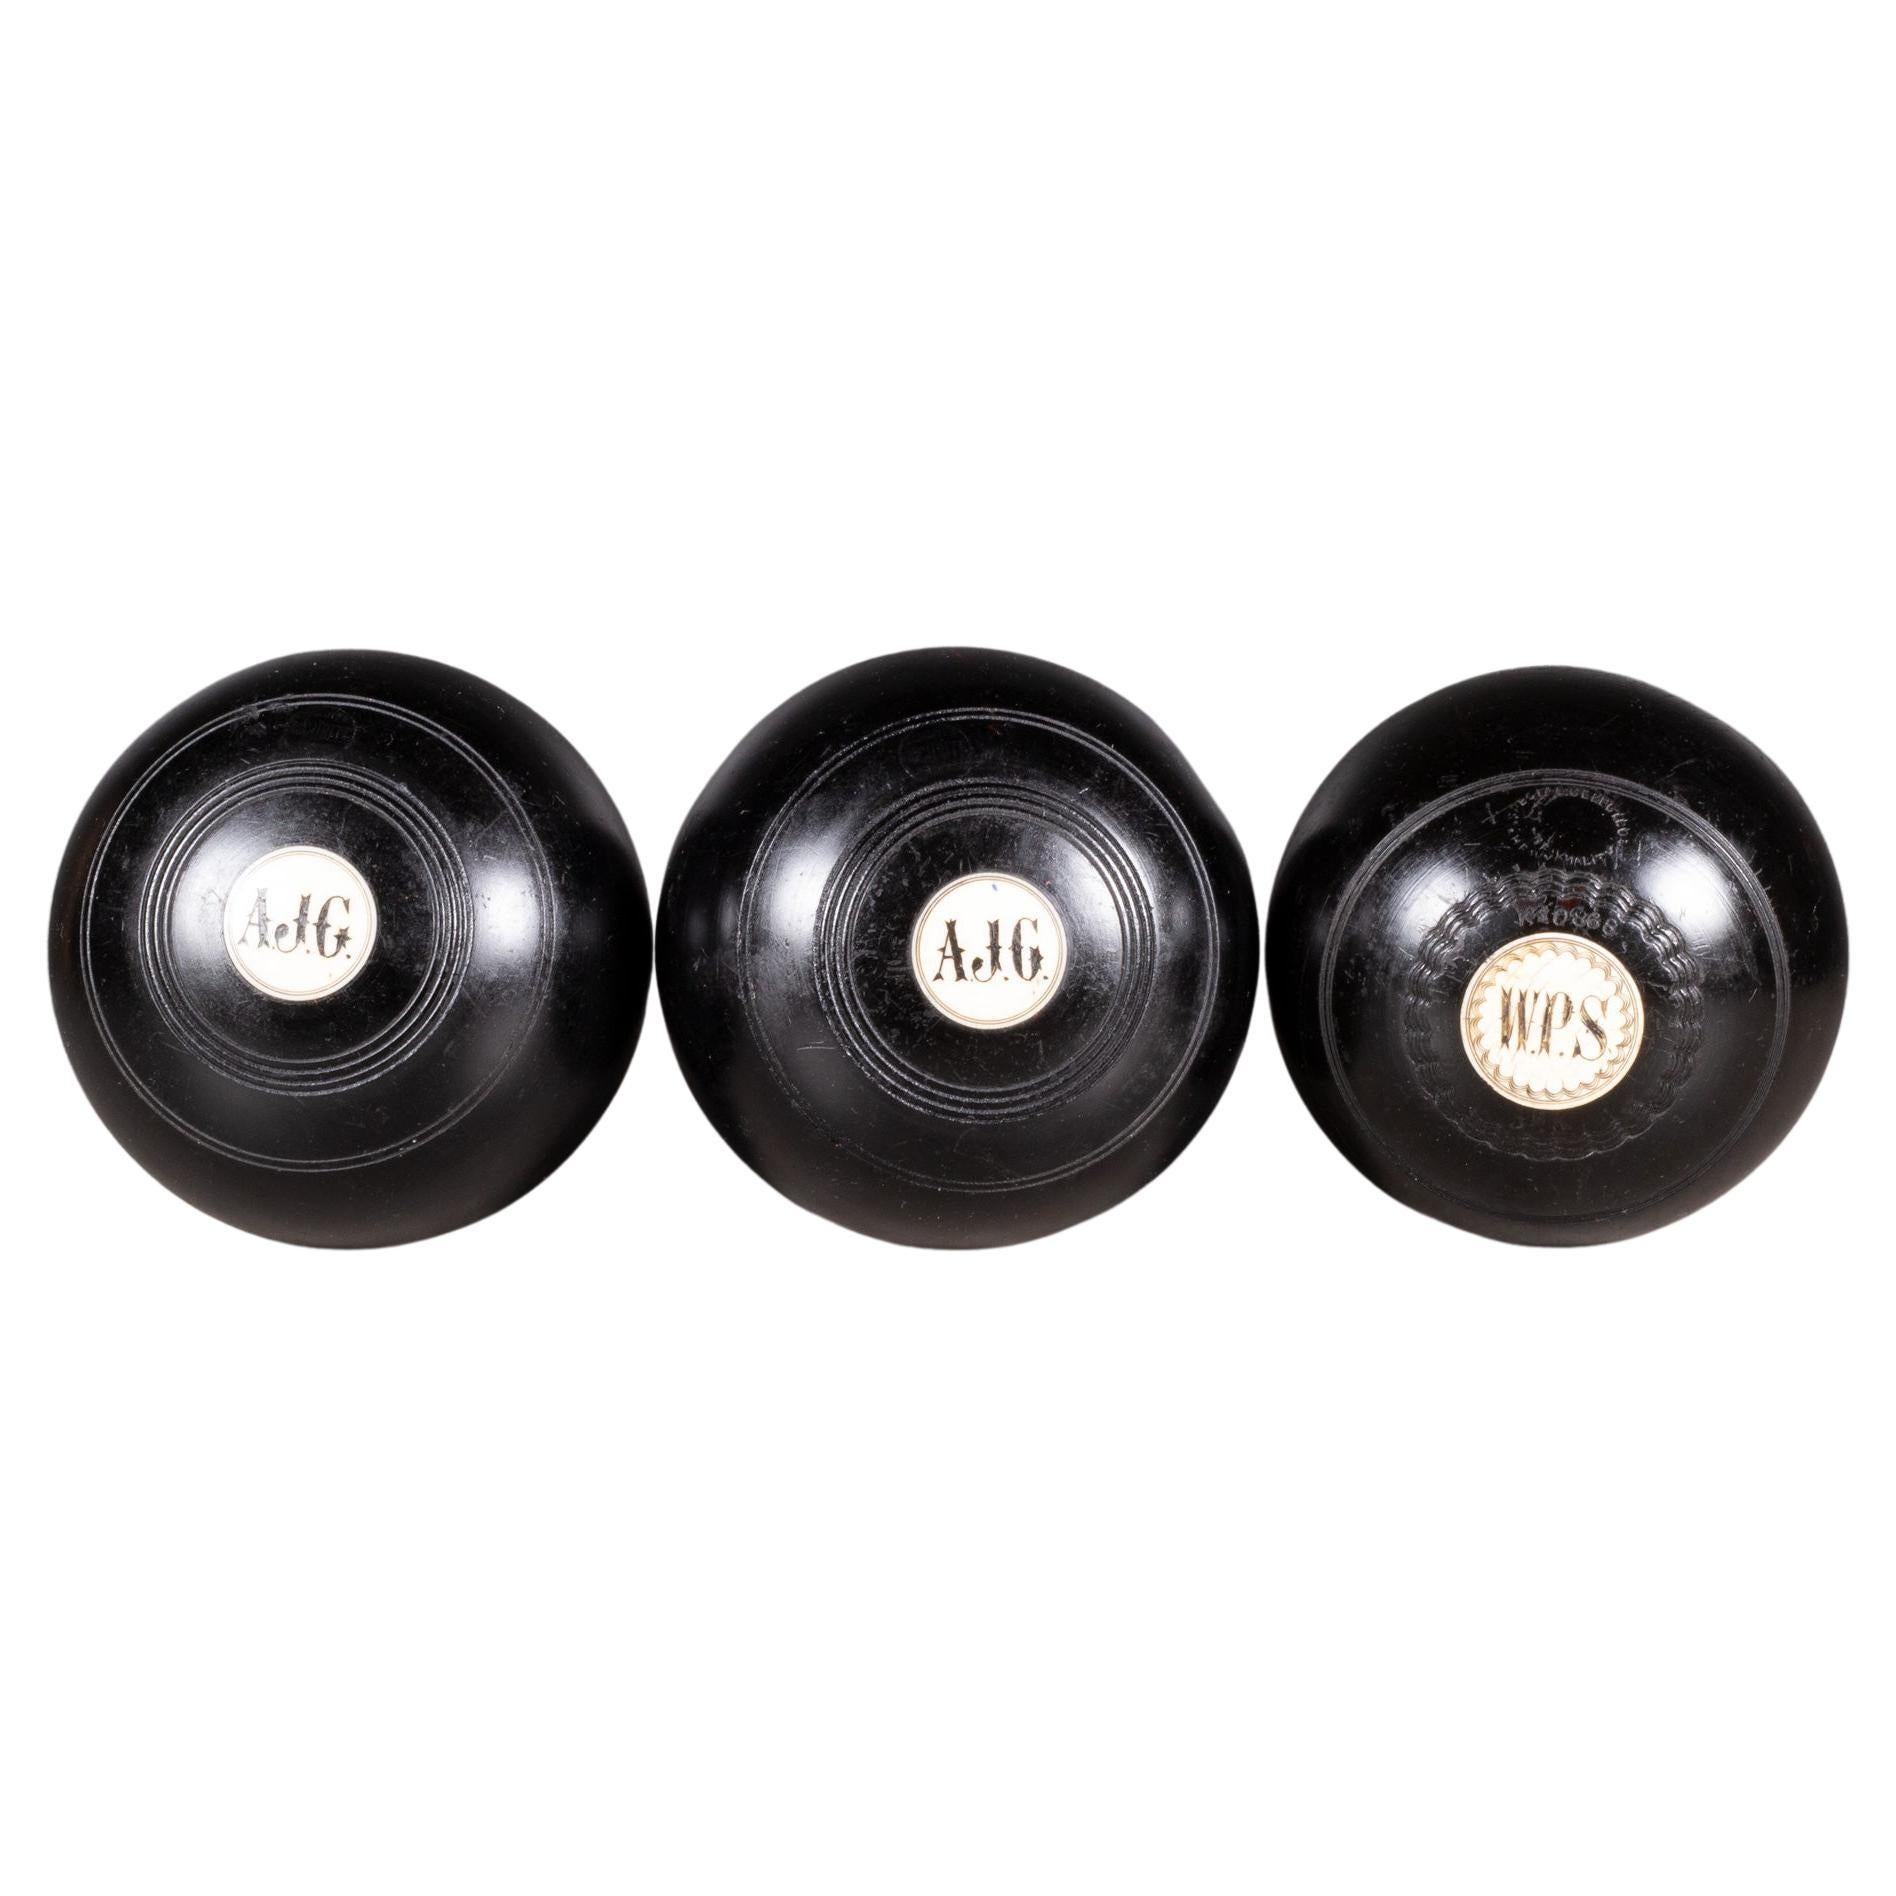 Antique Monogrammed Bone Inlaid English Lawn Balls c.1900 (FREE SHIPPING) For Sale